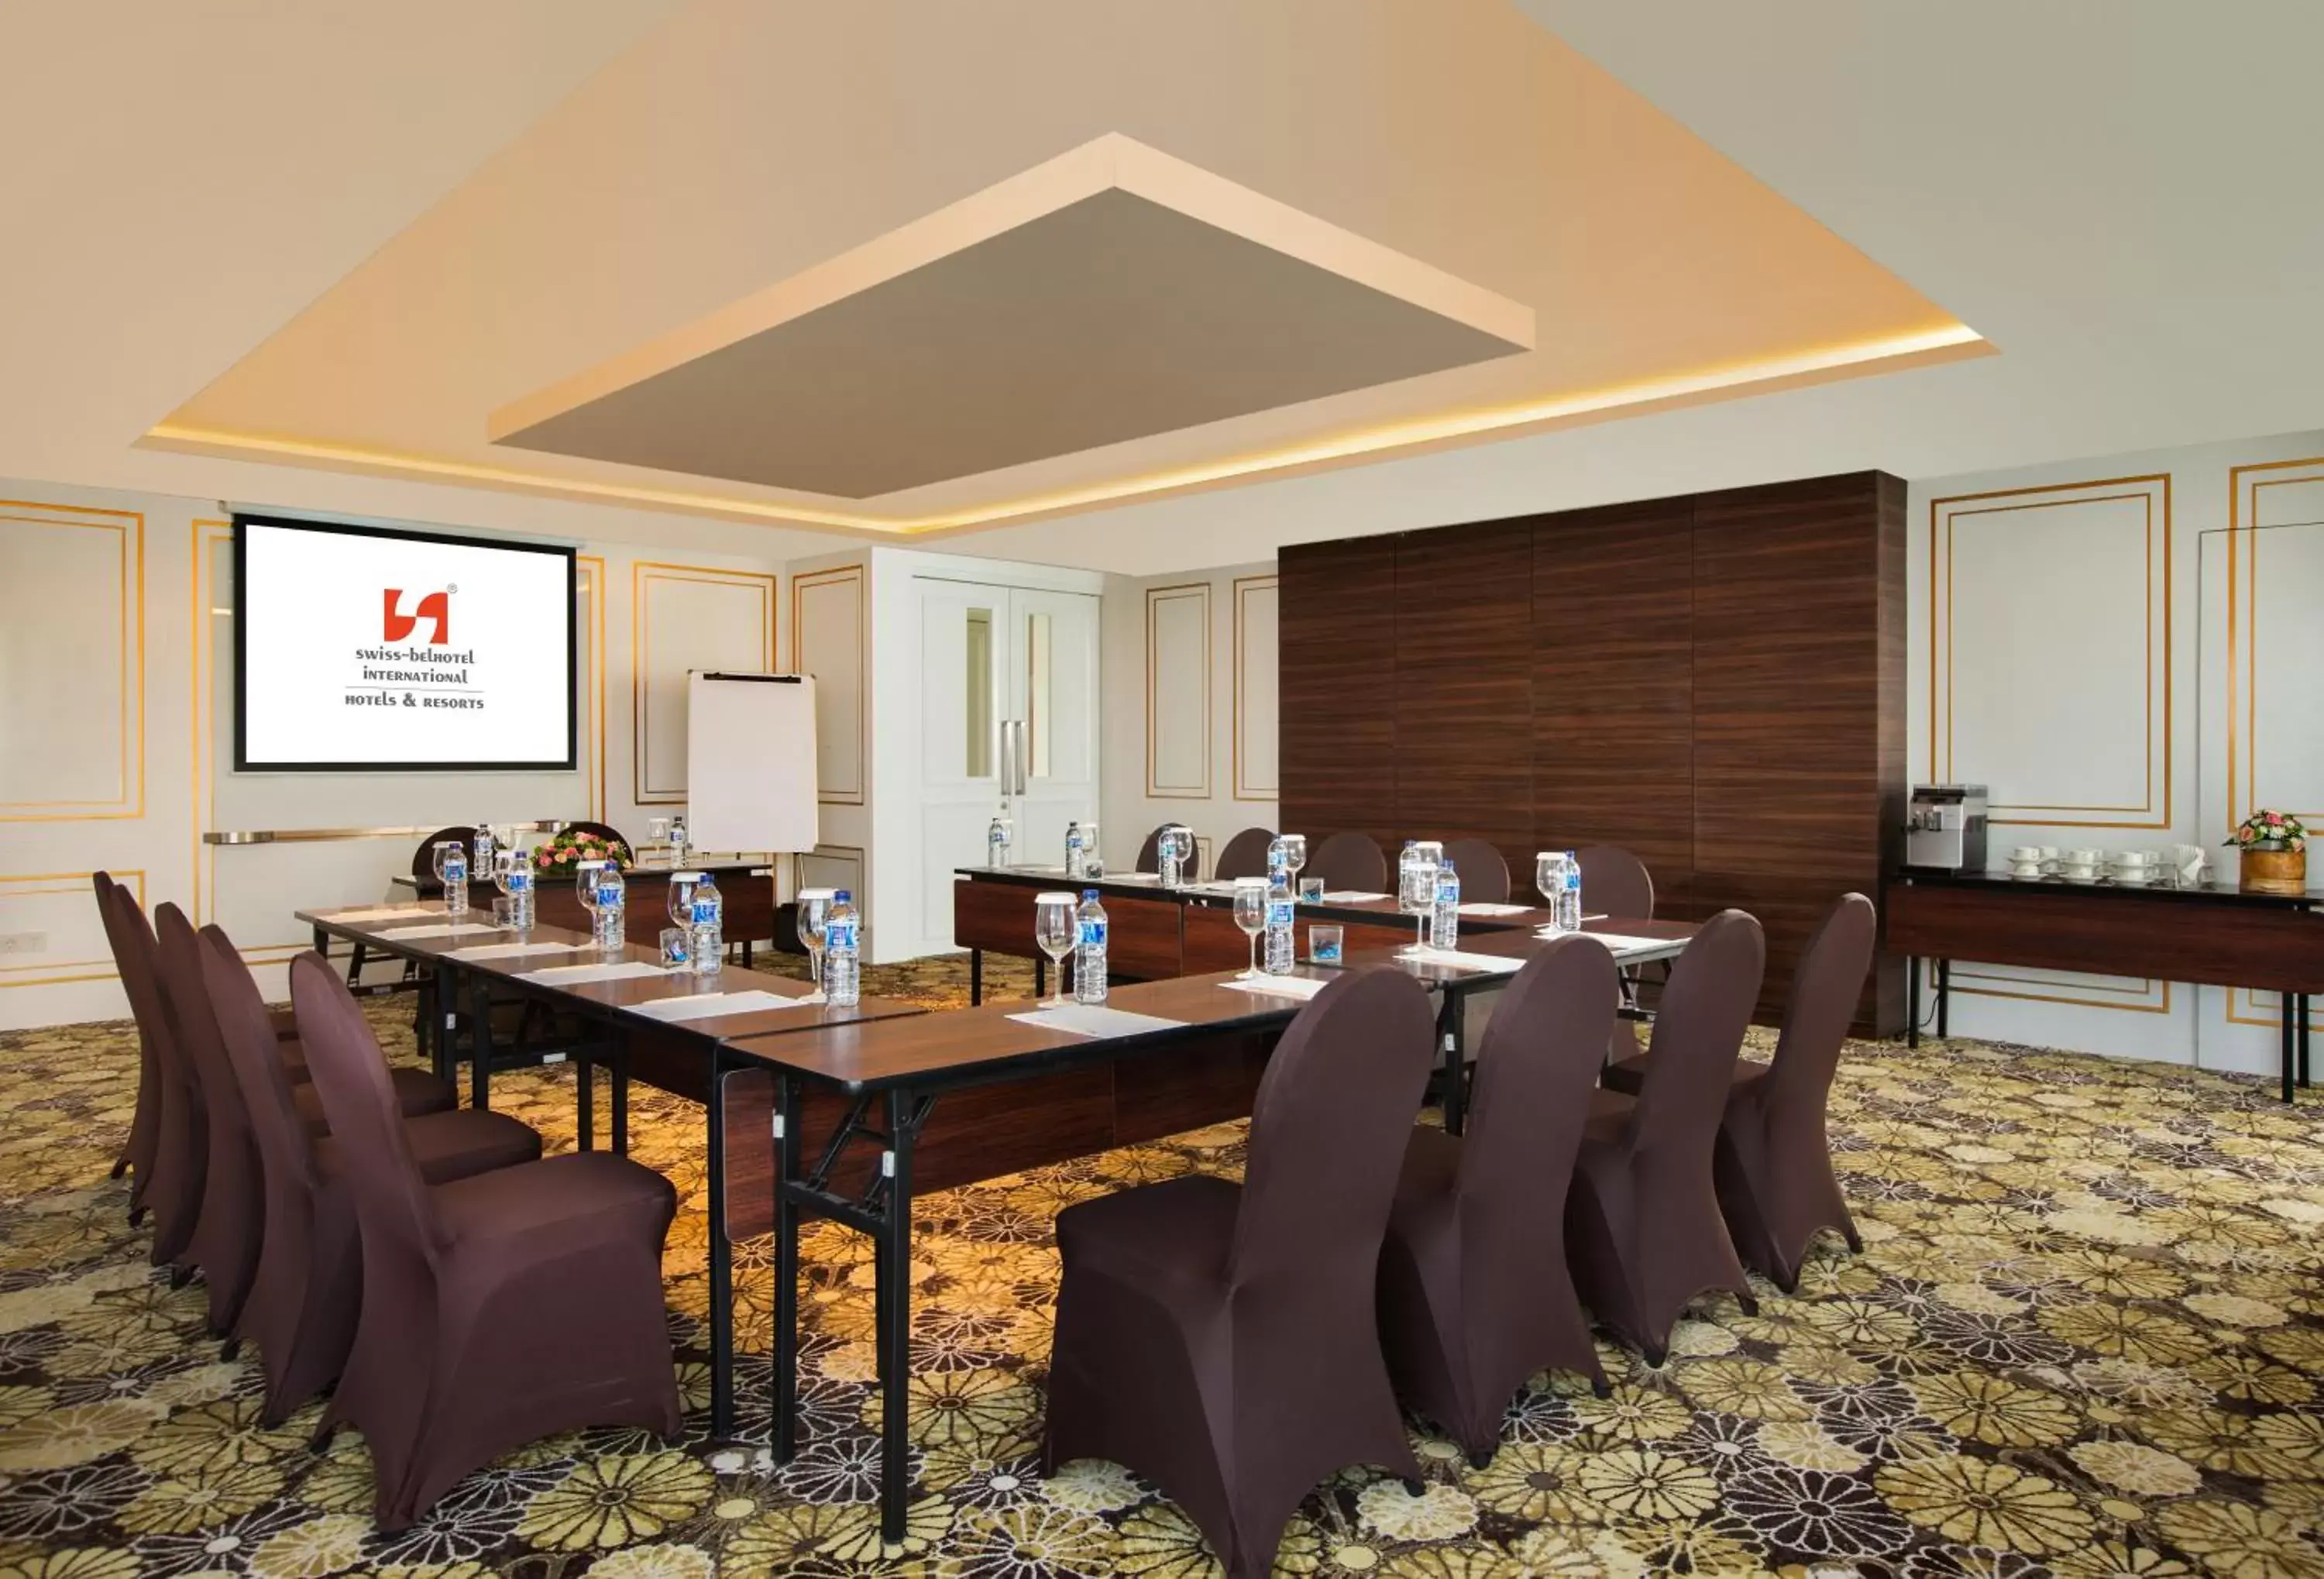 Banquet/Function facilities, Business Area/Conference Room in Swiss-Belboutique Yogyakarta